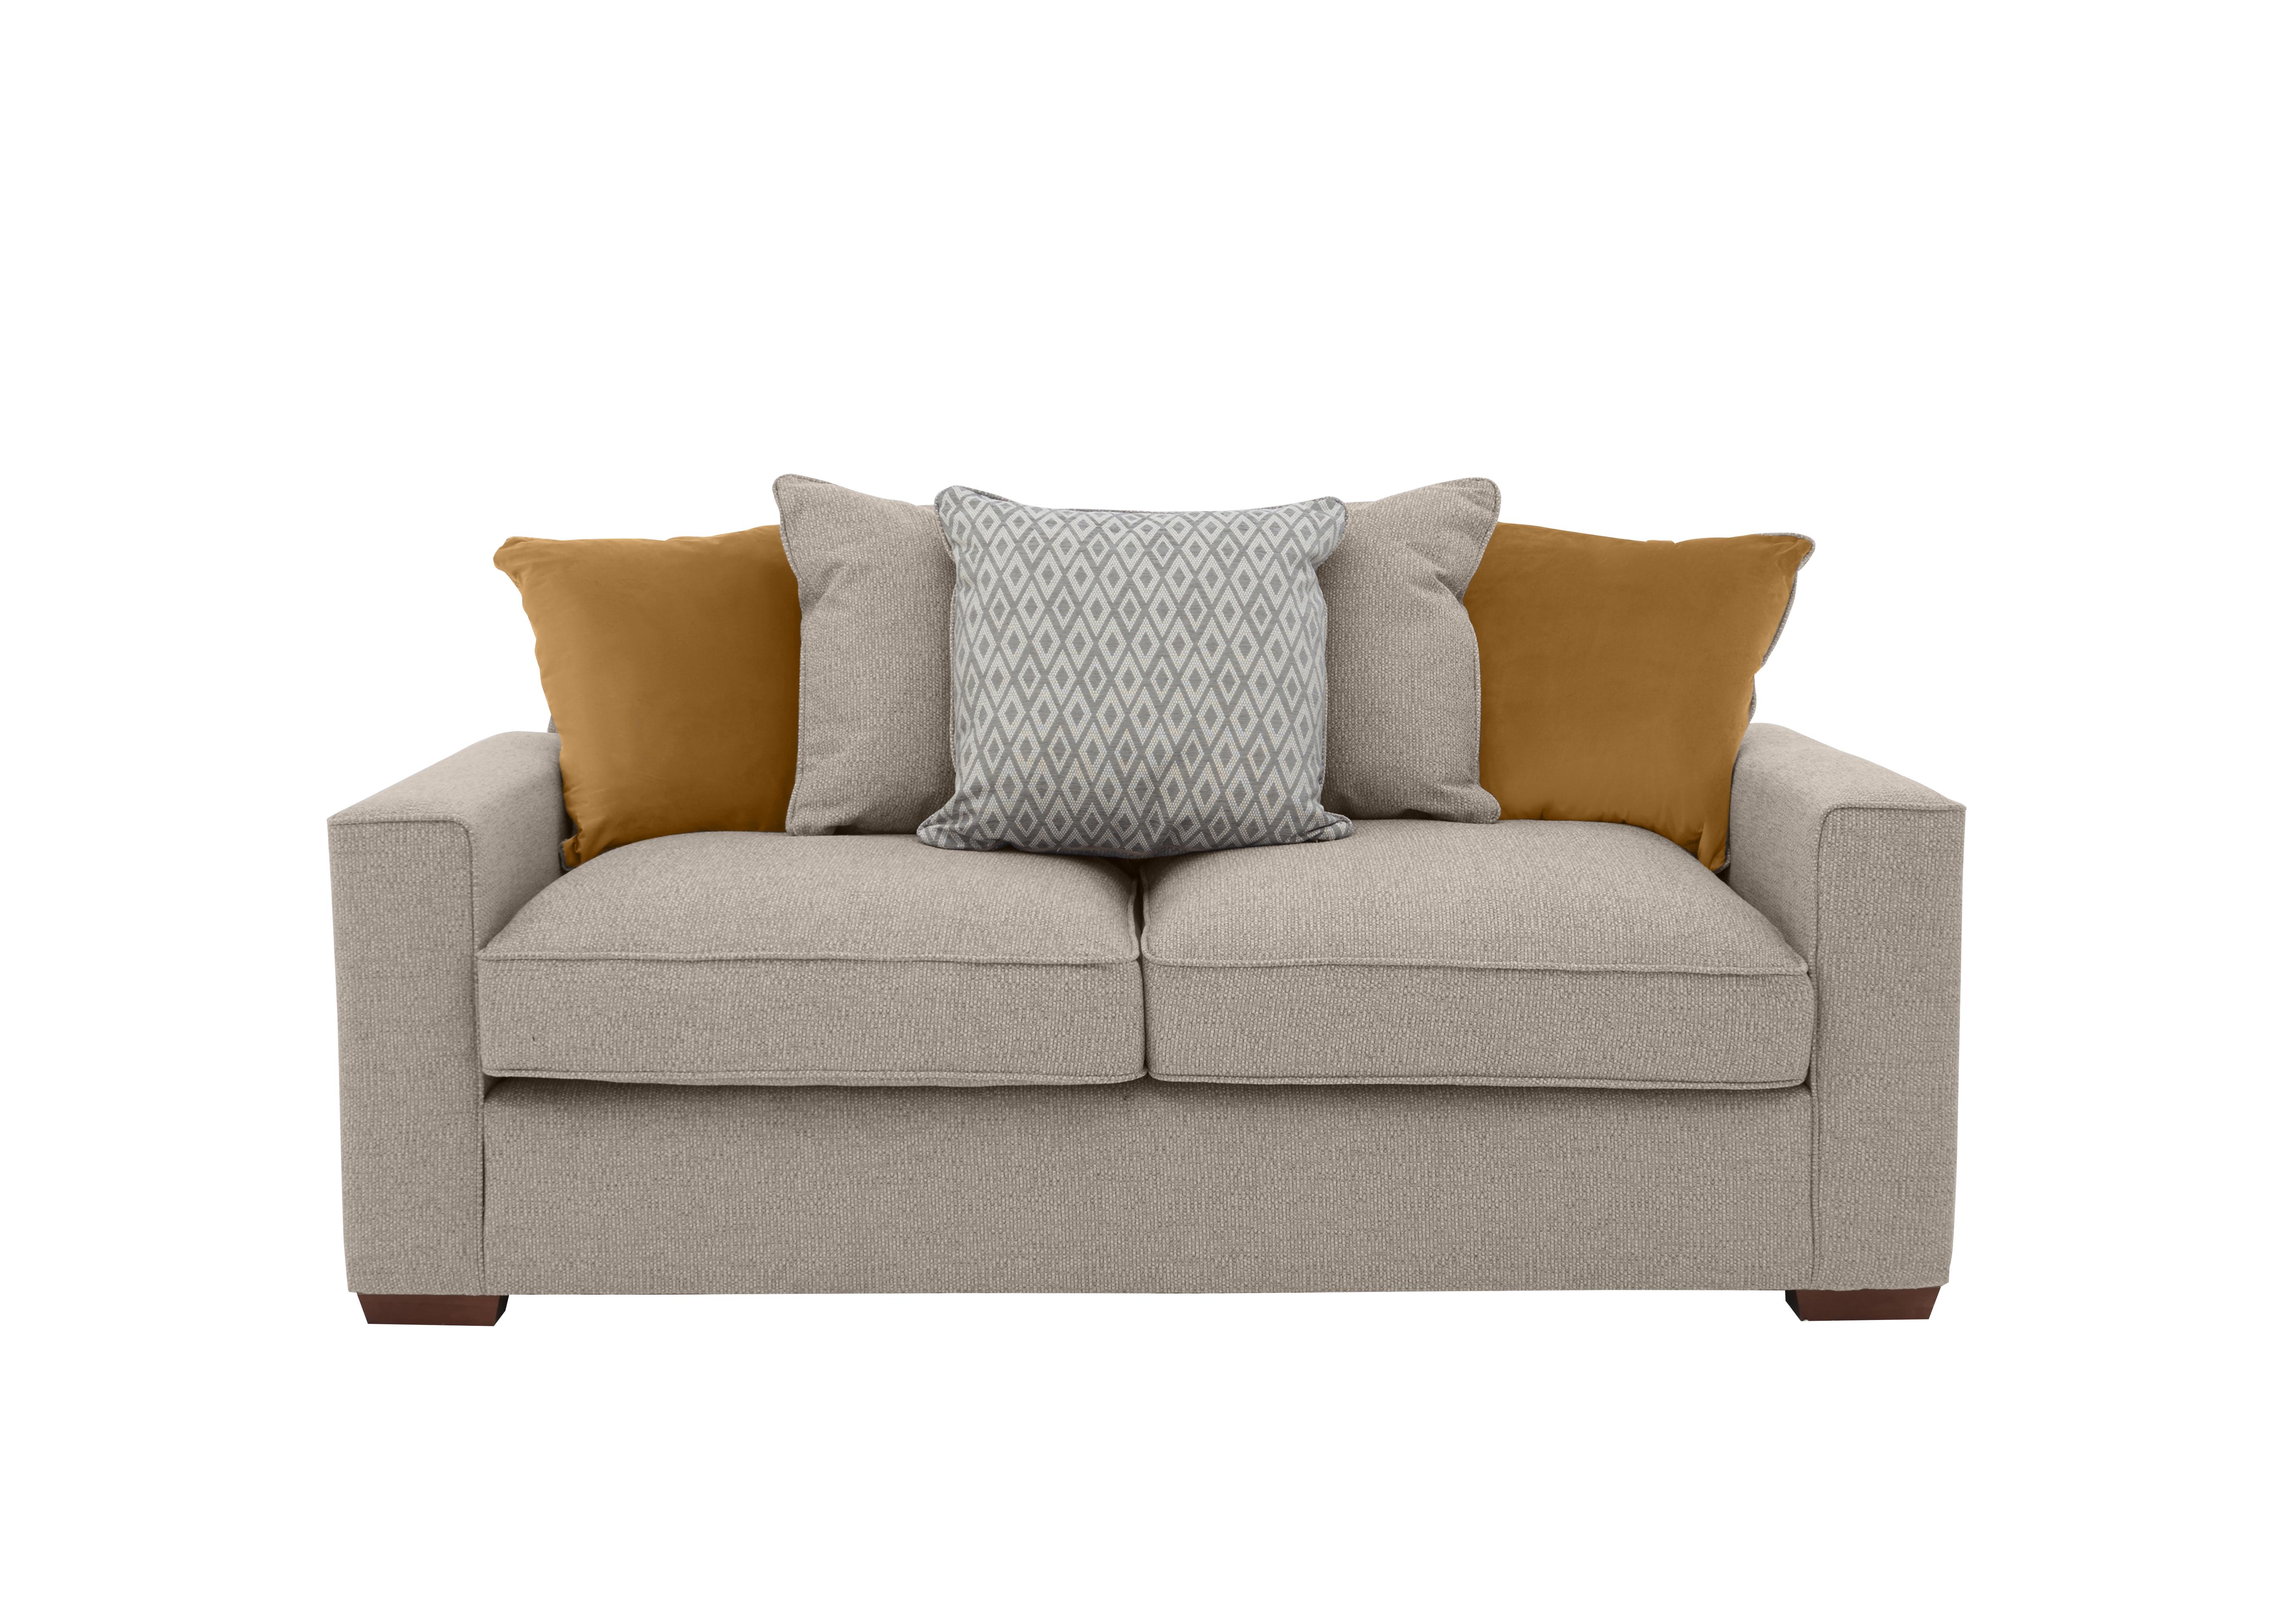 Cory 3 Seater Fabric Scatter Back Sofa Bed in Dallas Natural Mustard Pack on Furniture Village